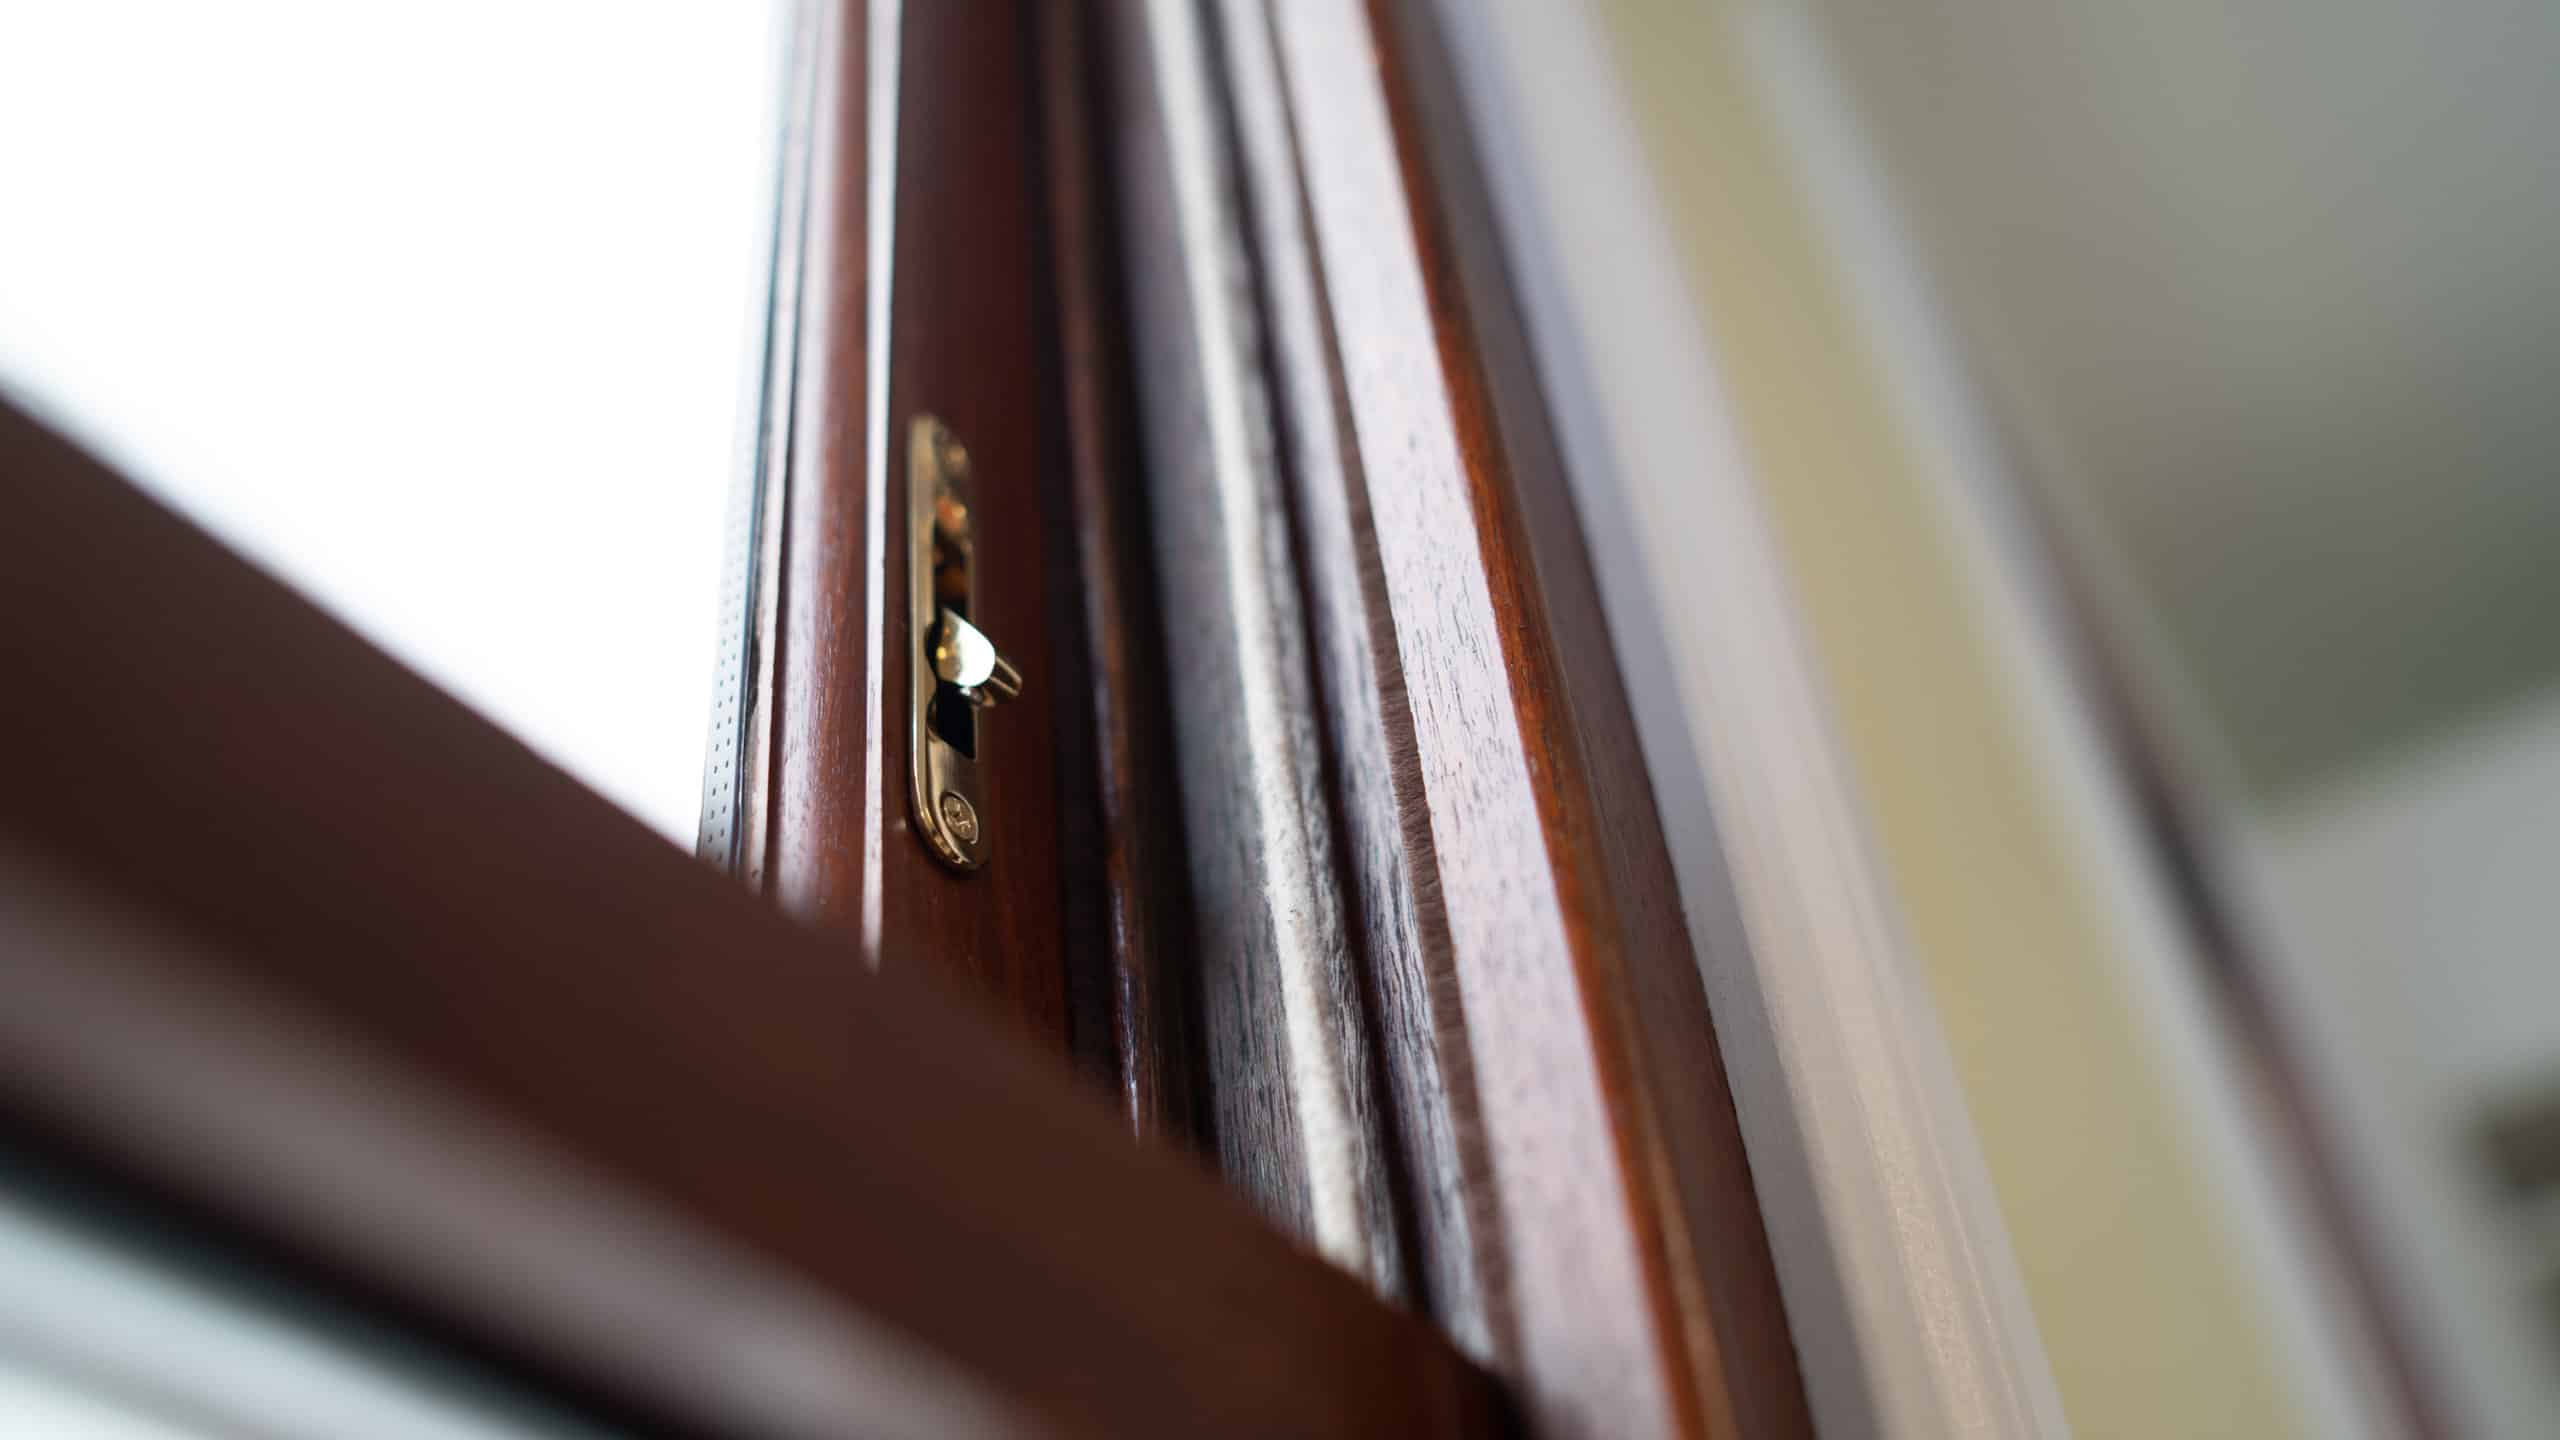 A close up view of a wooden window frame with latch